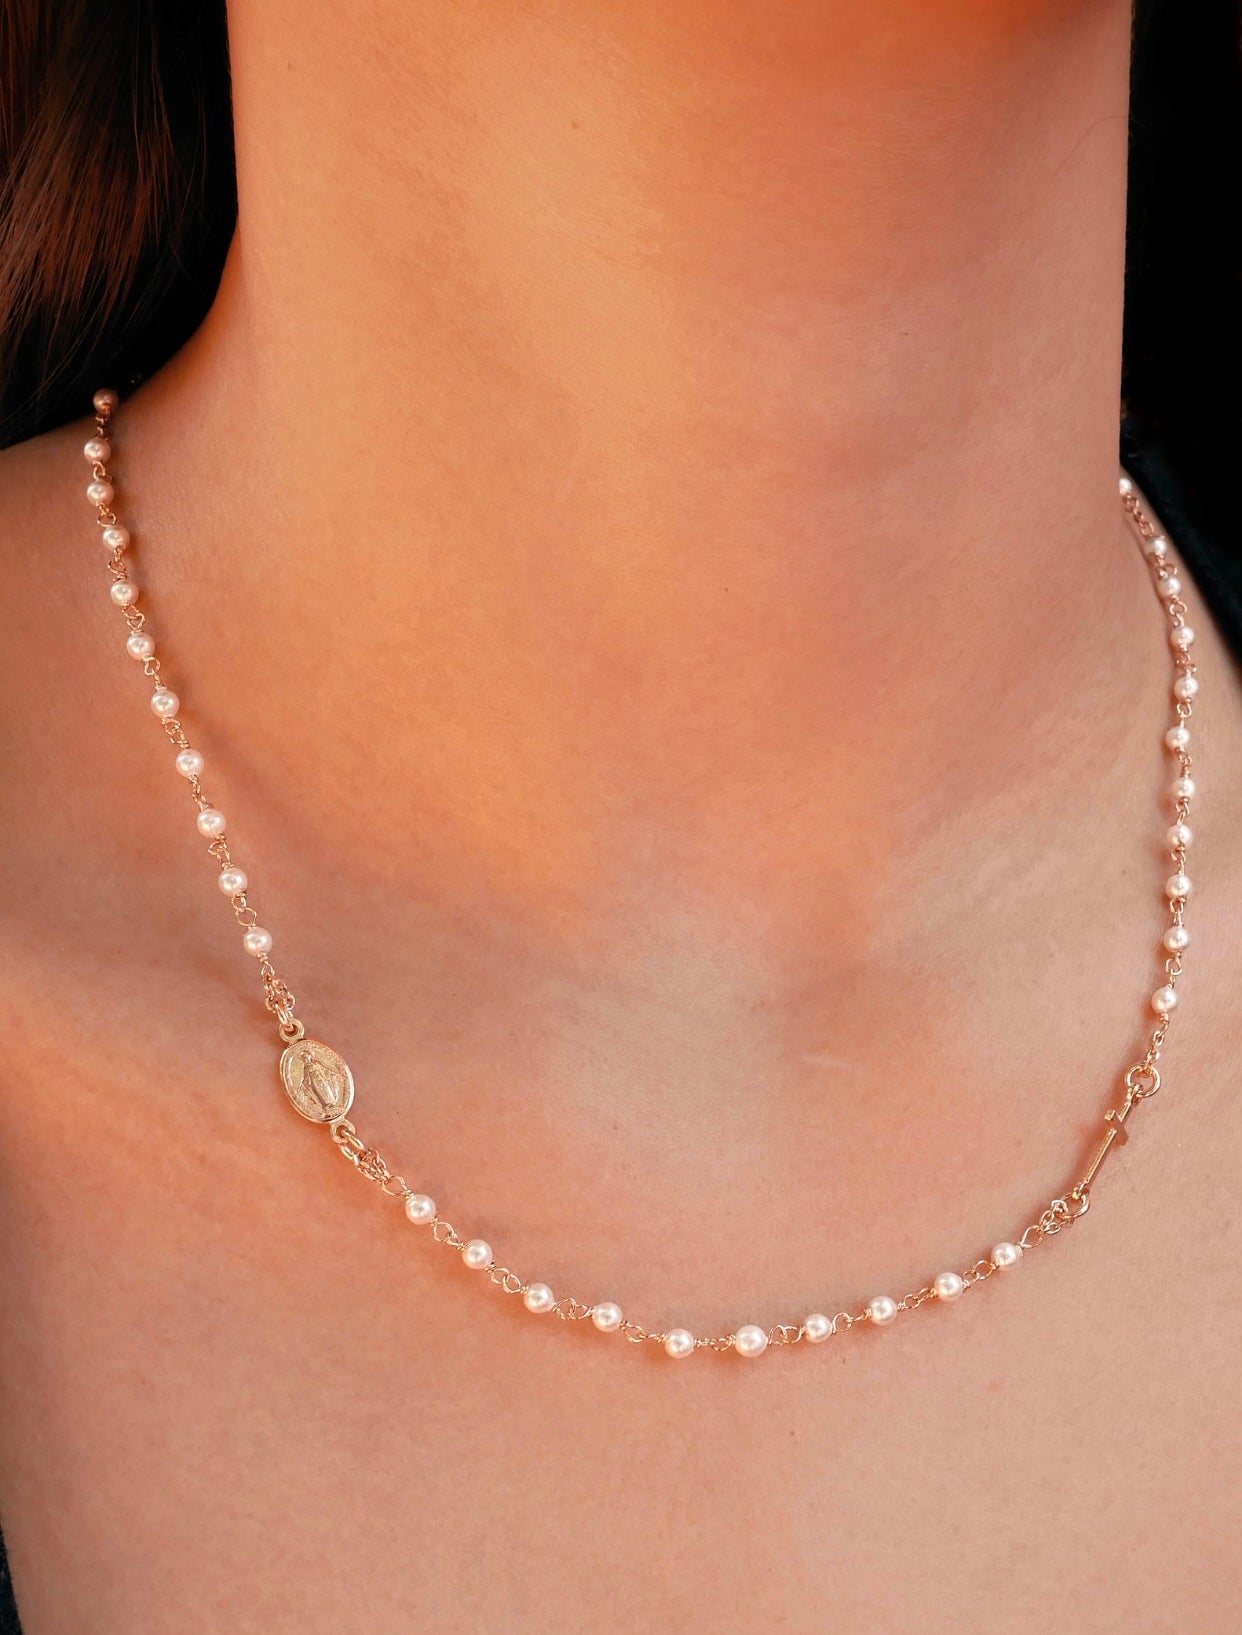 ROSARY necklace with white pearls